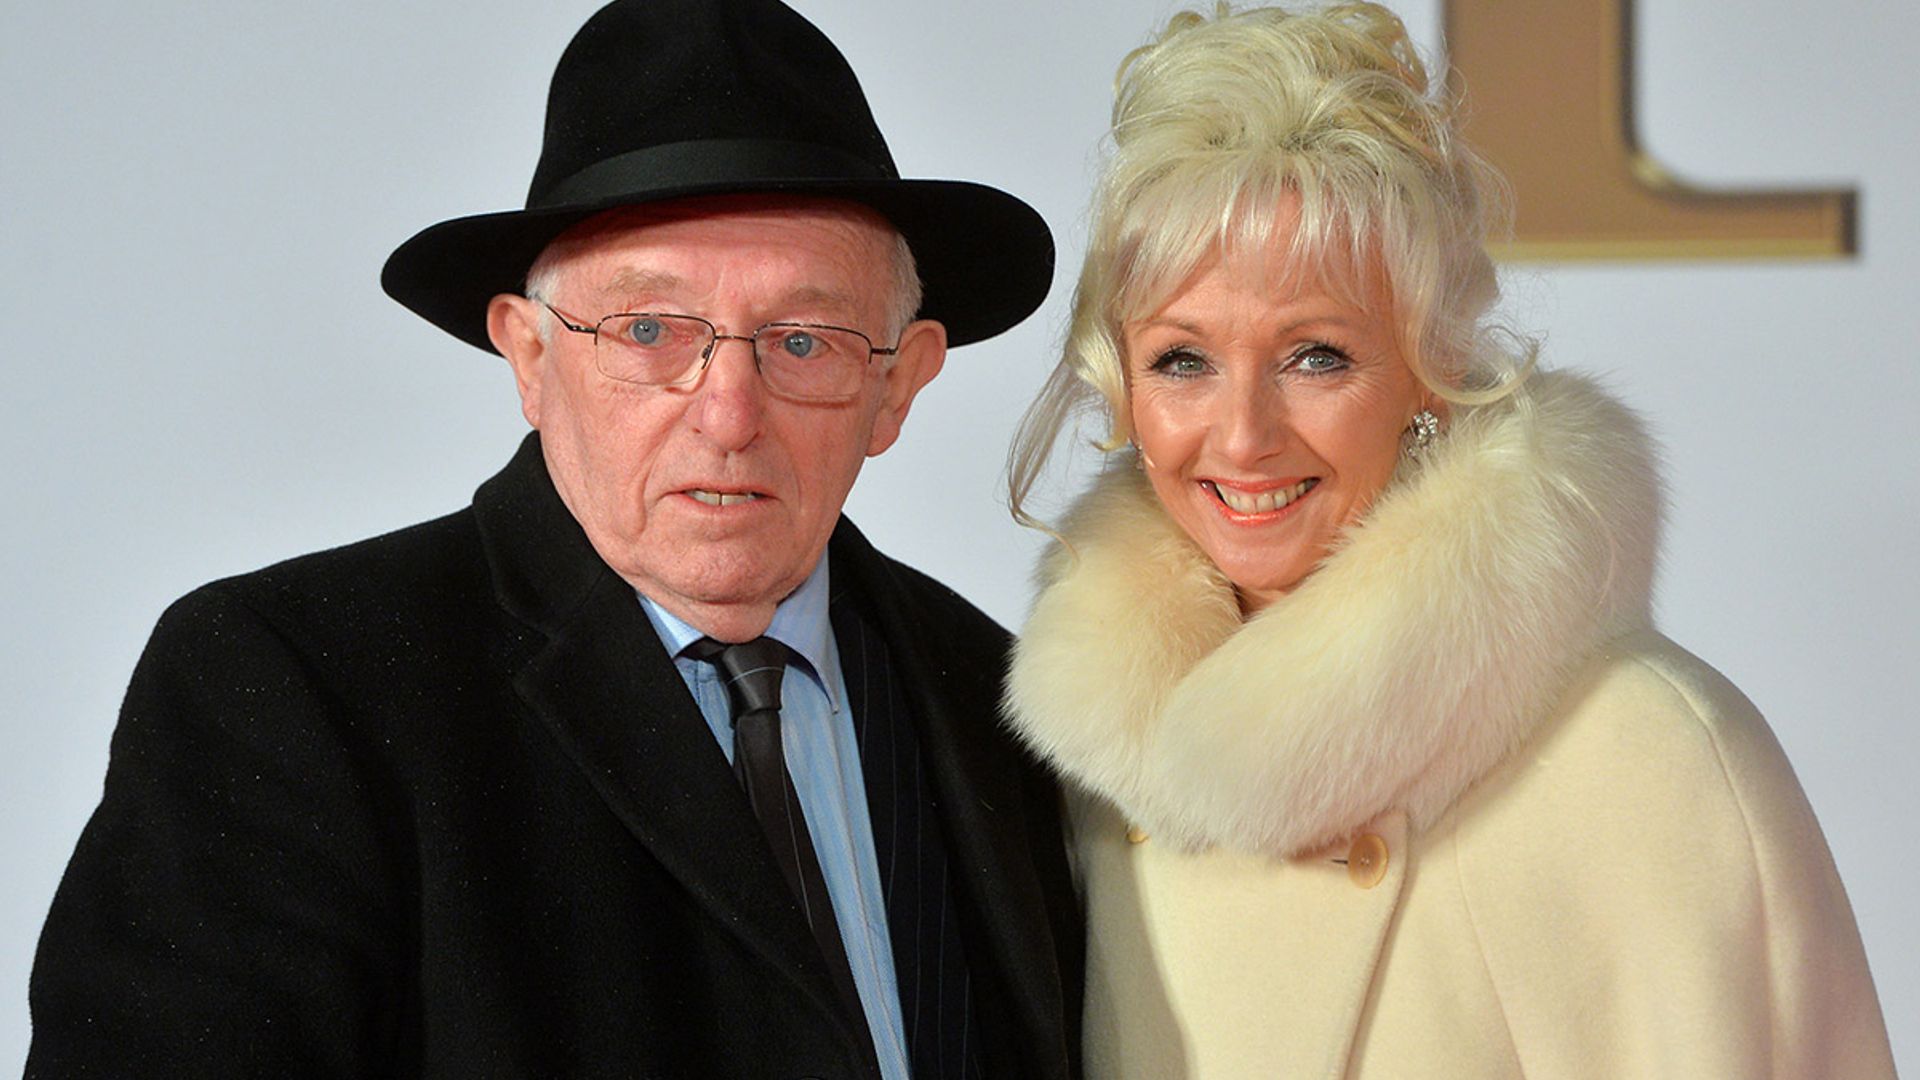 Former Strictly star Debbie McGee reveals she is open to finding love again